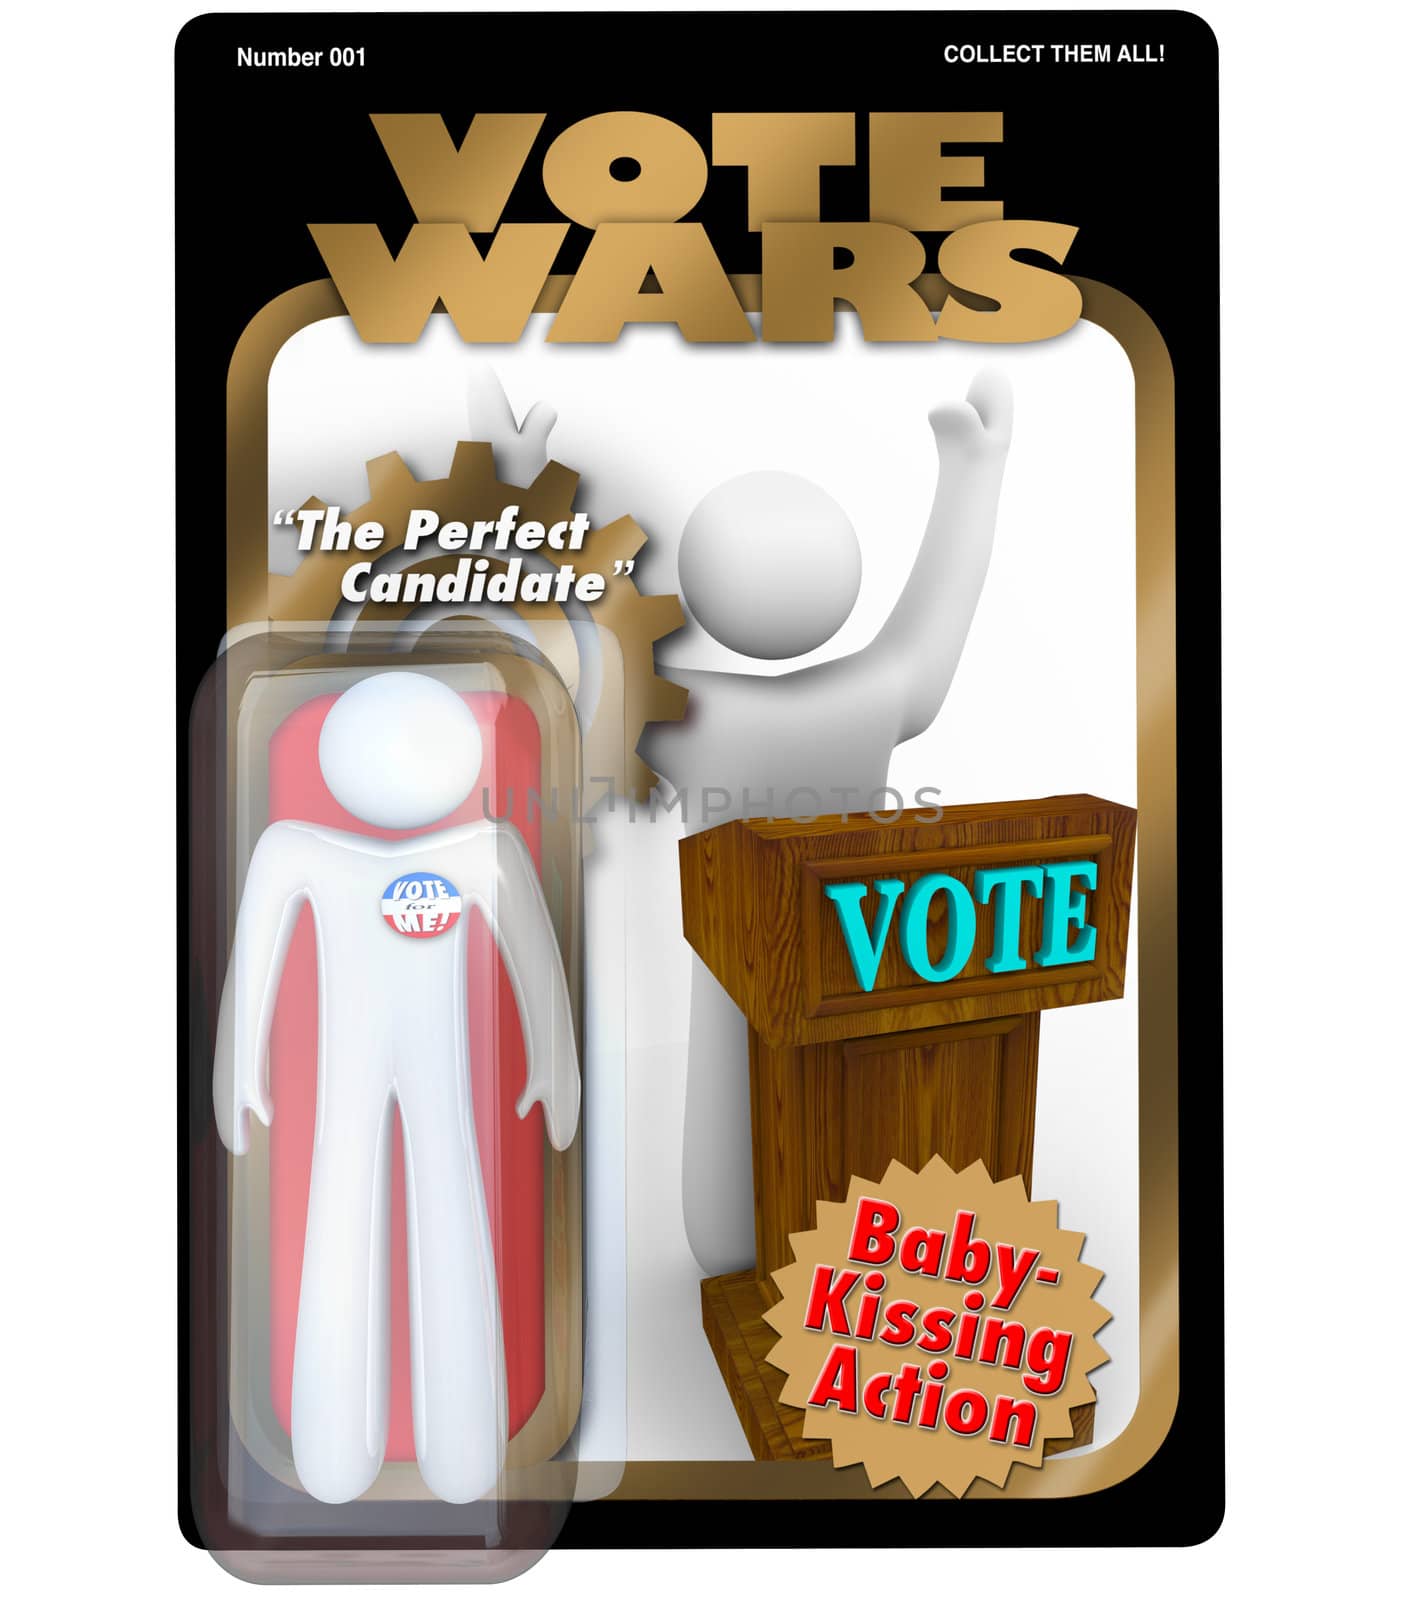 Political Candidate Action Figure Vote in Election Campaign by iQoncept